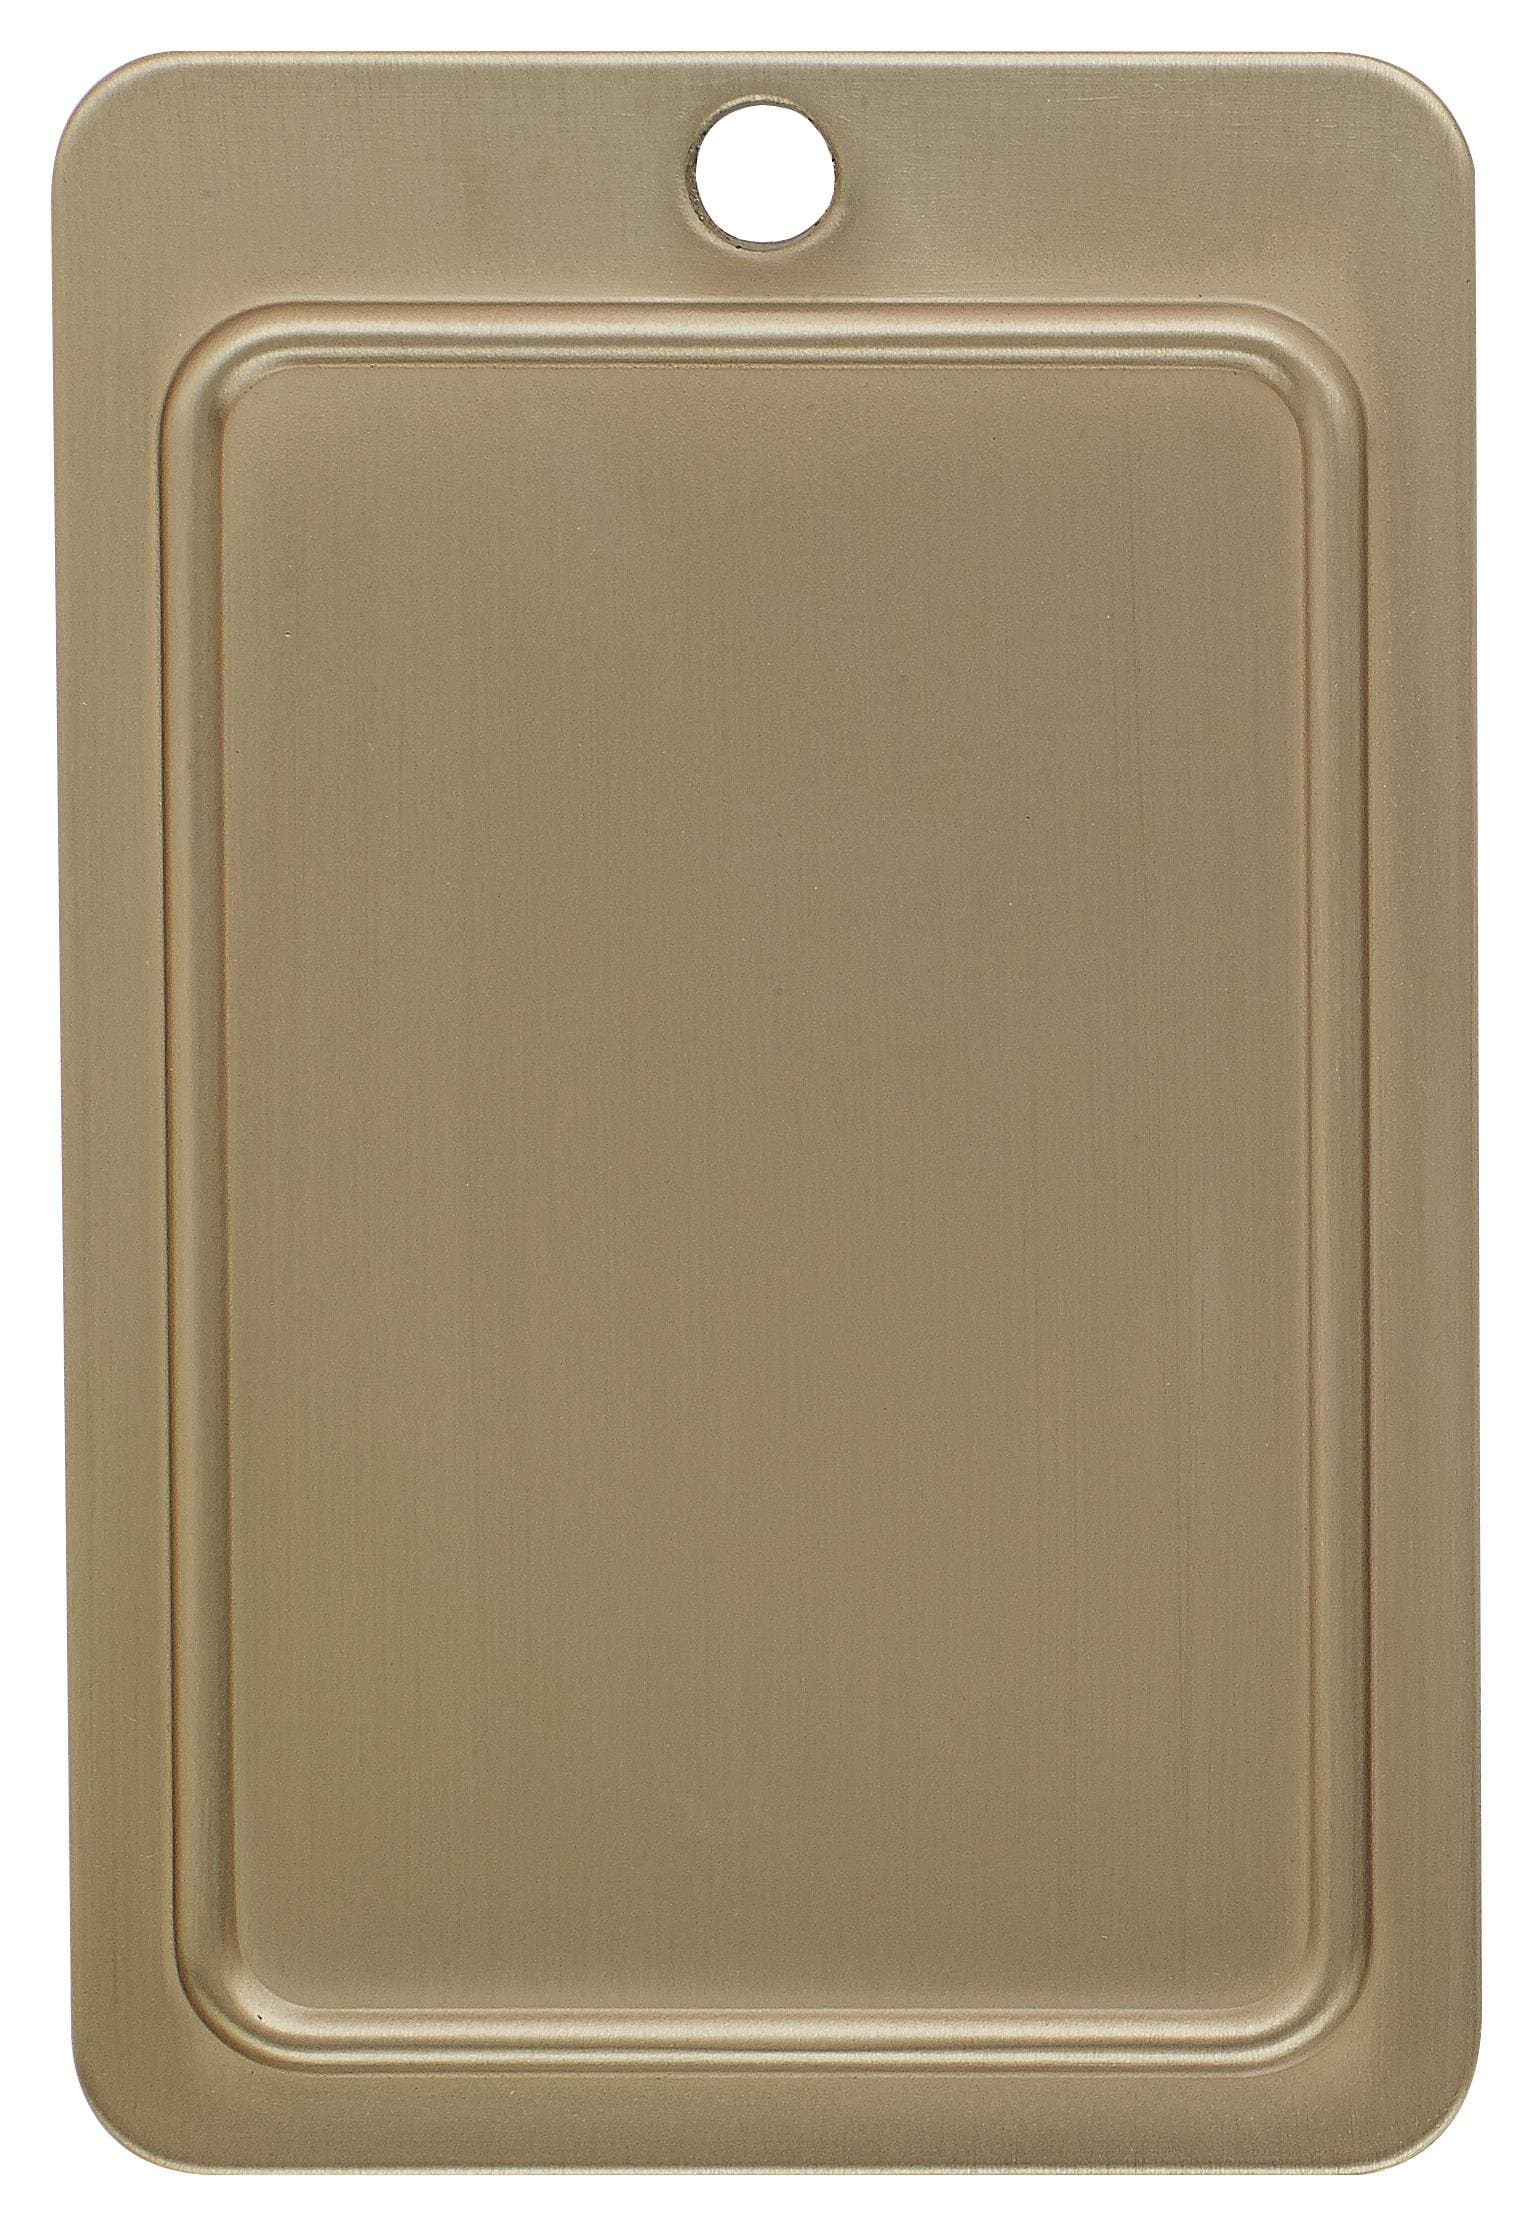 Amerock Kane 3-3/4-in Champagne Drawer Cup Drawer department Pulls Center Rectangular the Center at in Golden Pulls to